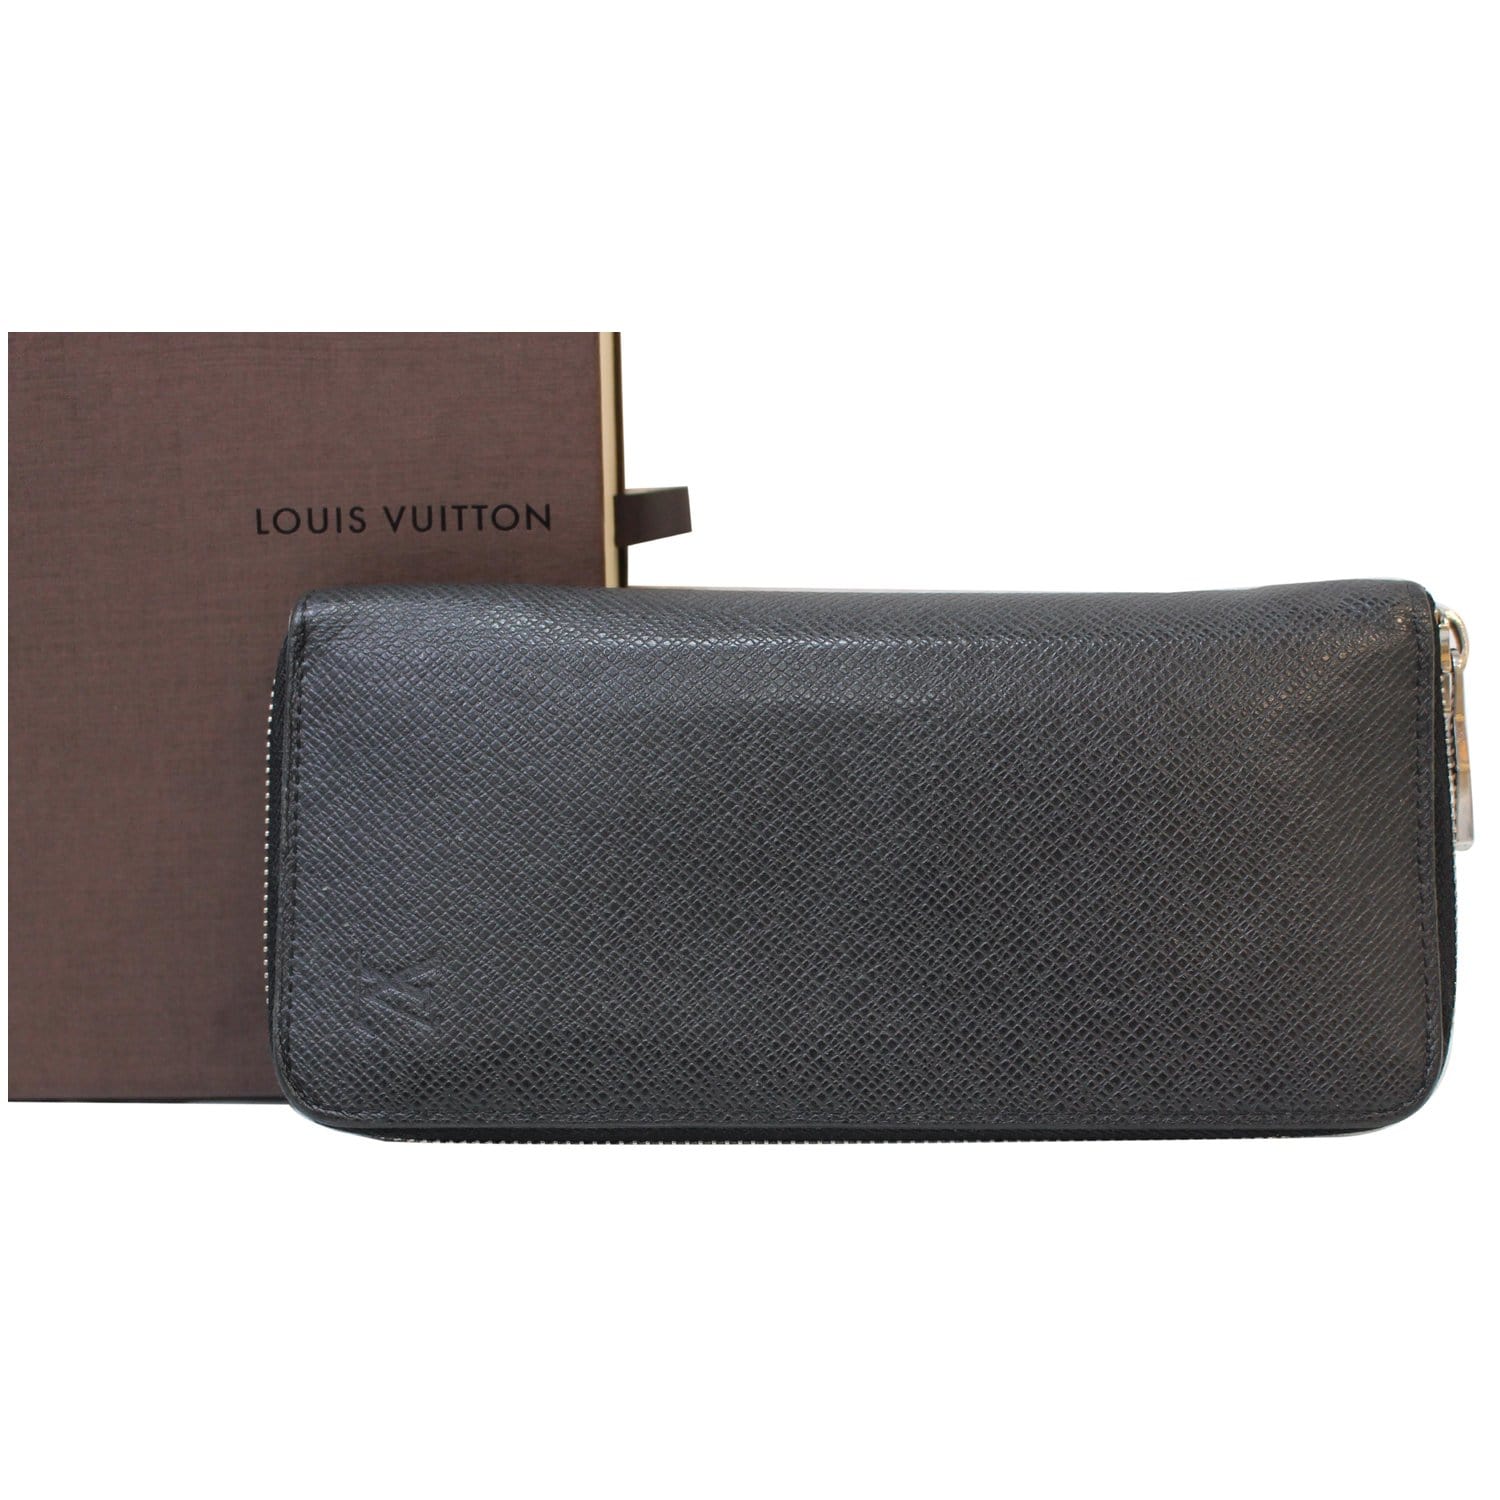 ZIPPY XL WALLET Taiga - Wallets and Small Leather Goods